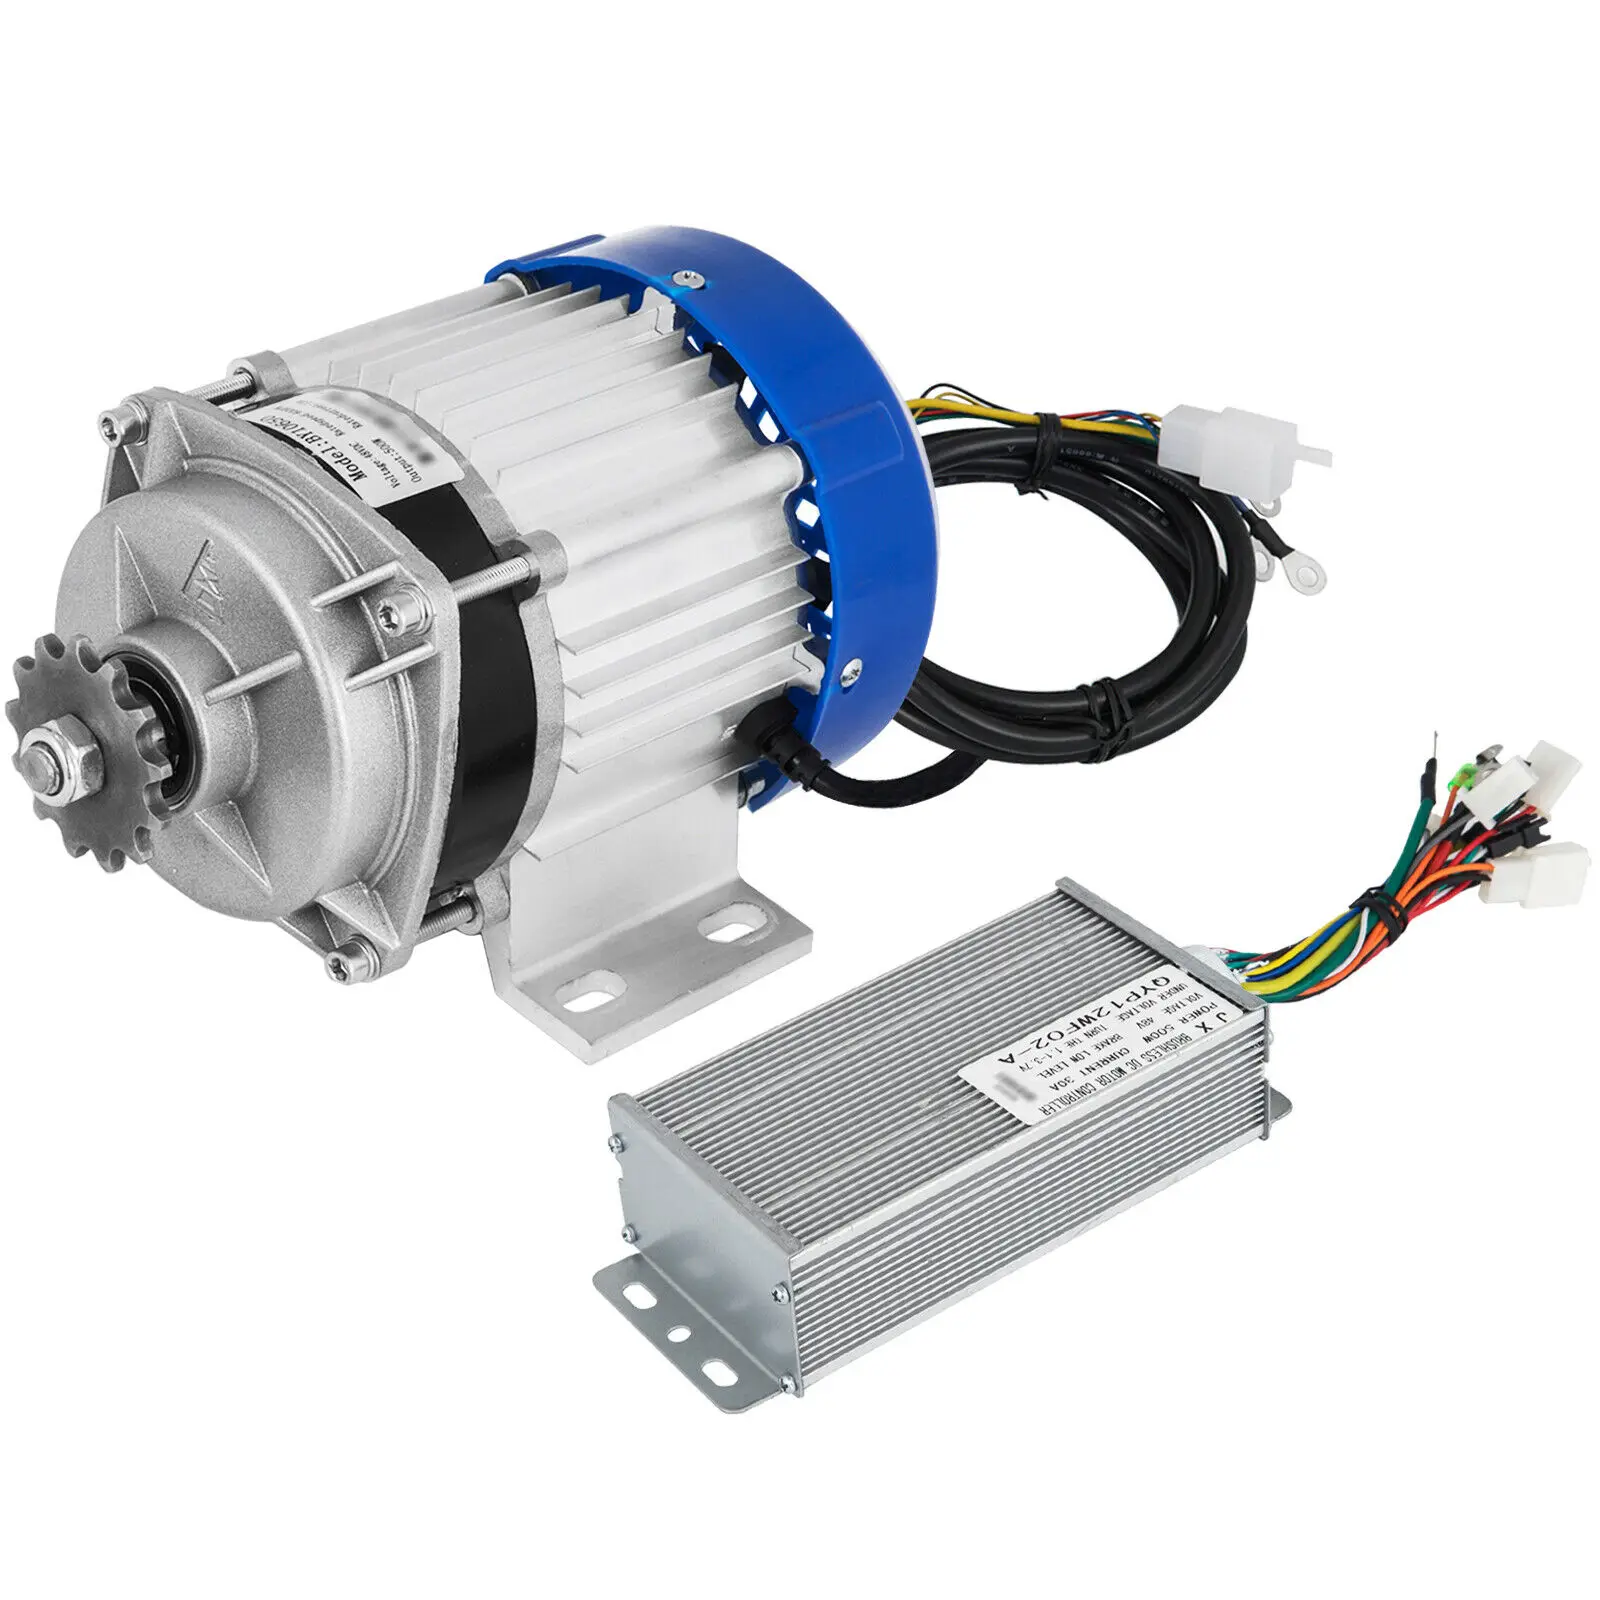 60V Brushless Electric Motor Gear Reduction 750W Permanent scooter scooter 